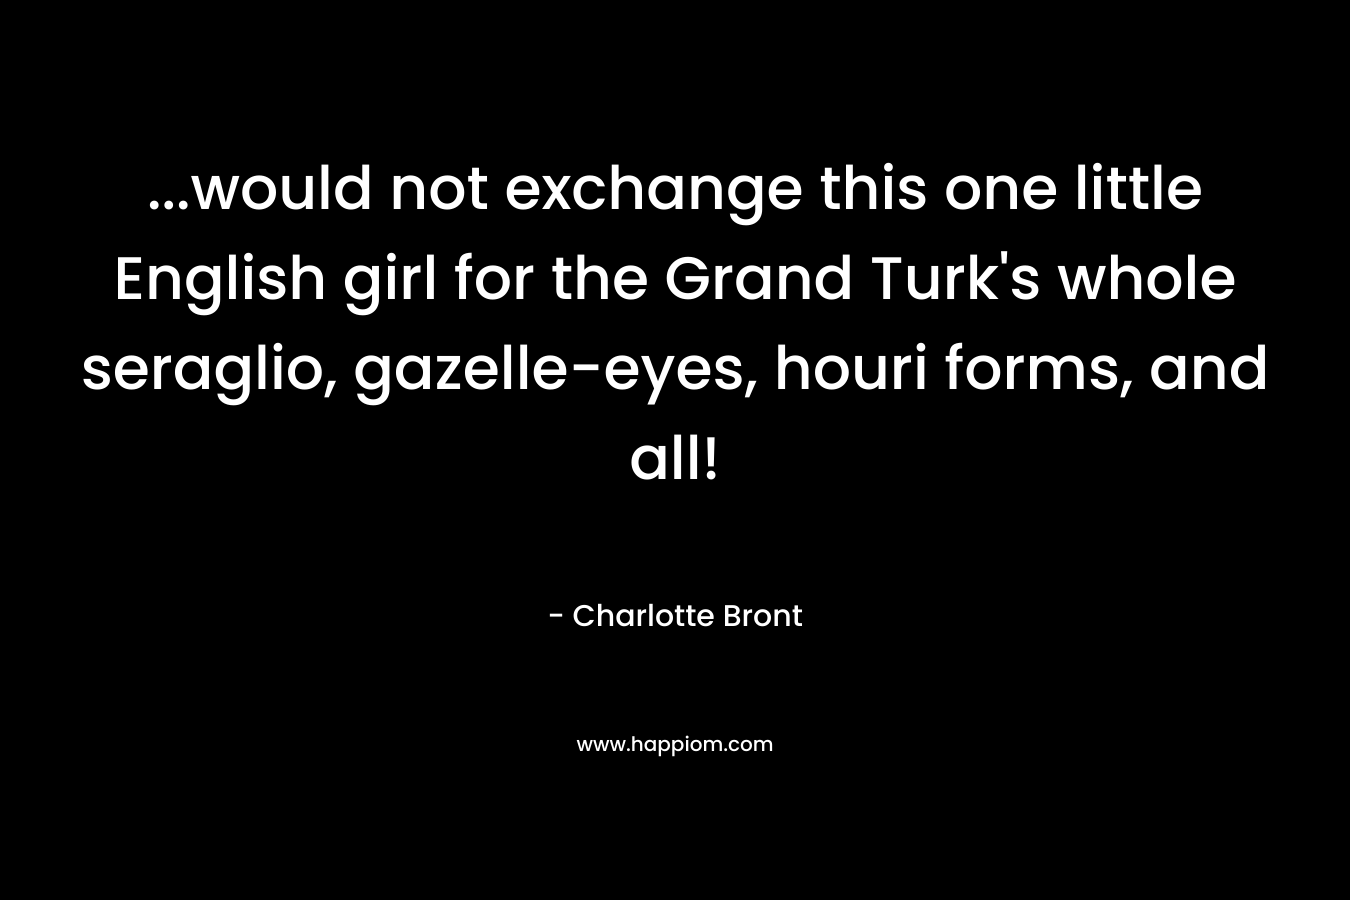 …would not exchange this one little English girl for the Grand Turk’s whole seraglio, gazelle-eyes, houri forms, and all! – Charlotte Bront